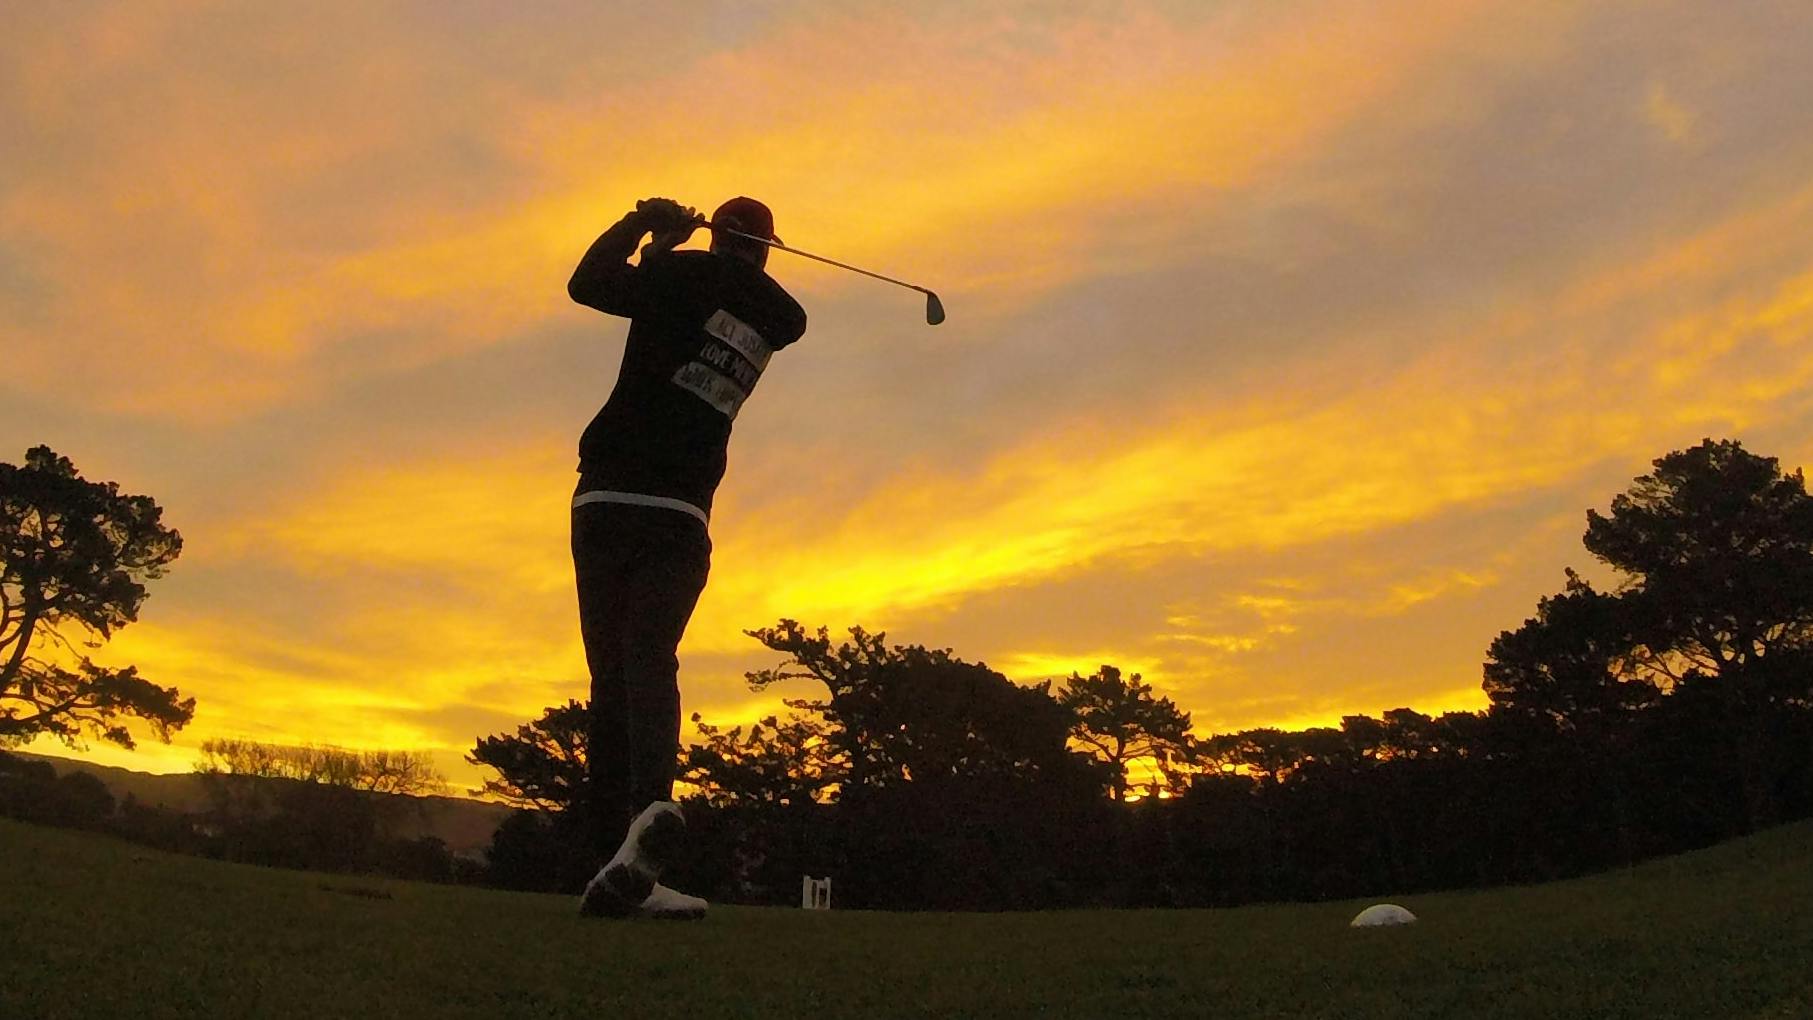 A golfer against the background of a sunset